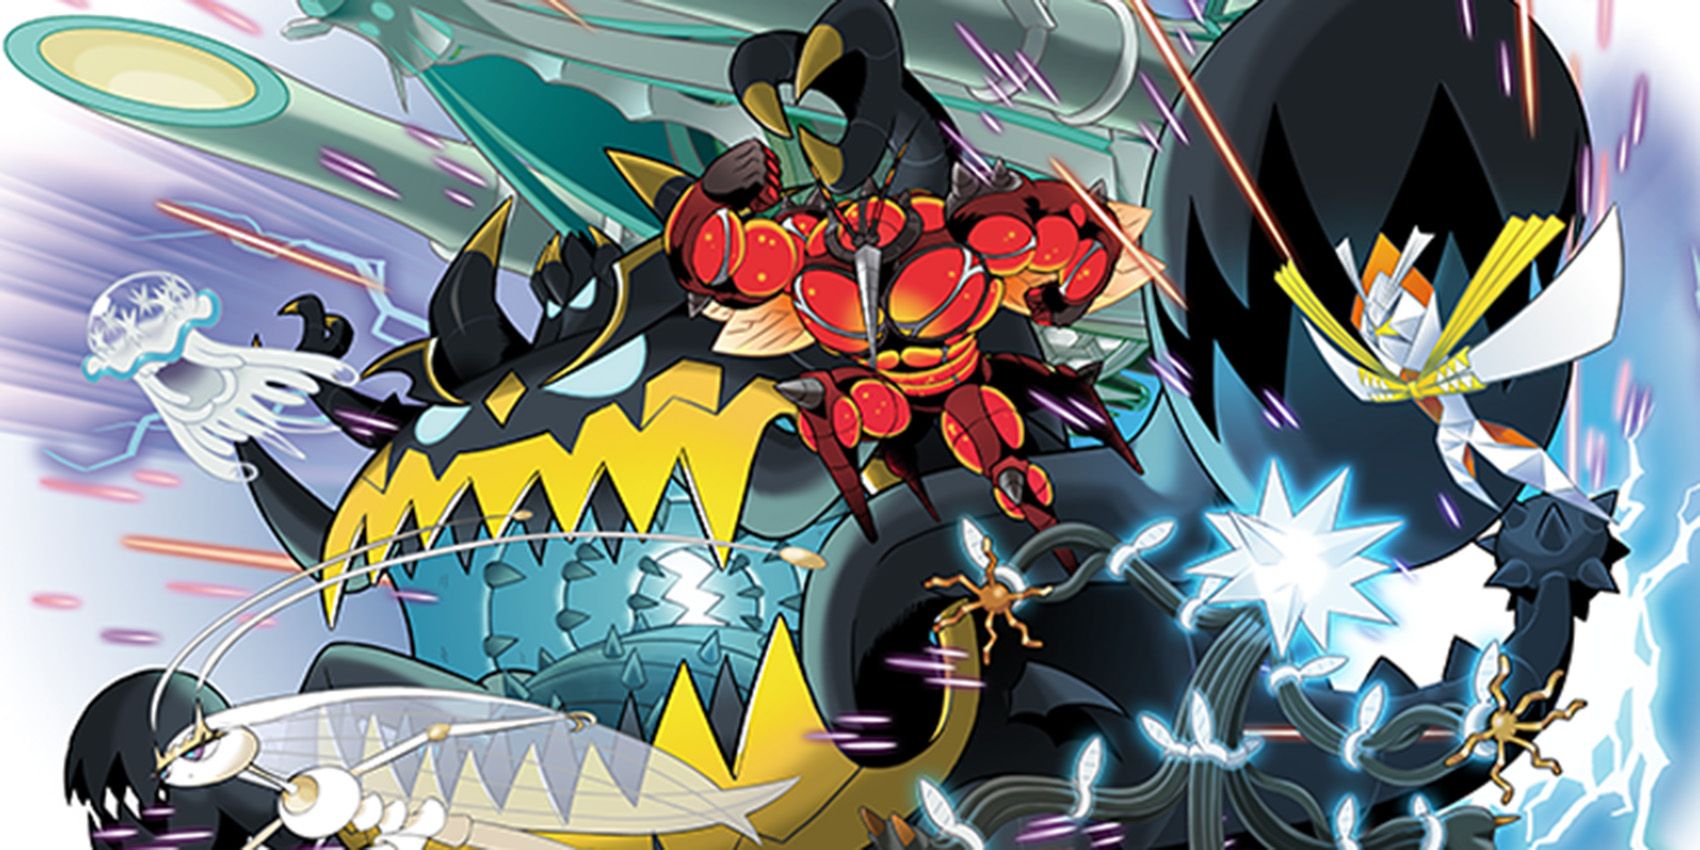 You Can Only Get ONE of These New Ultra Beasts 